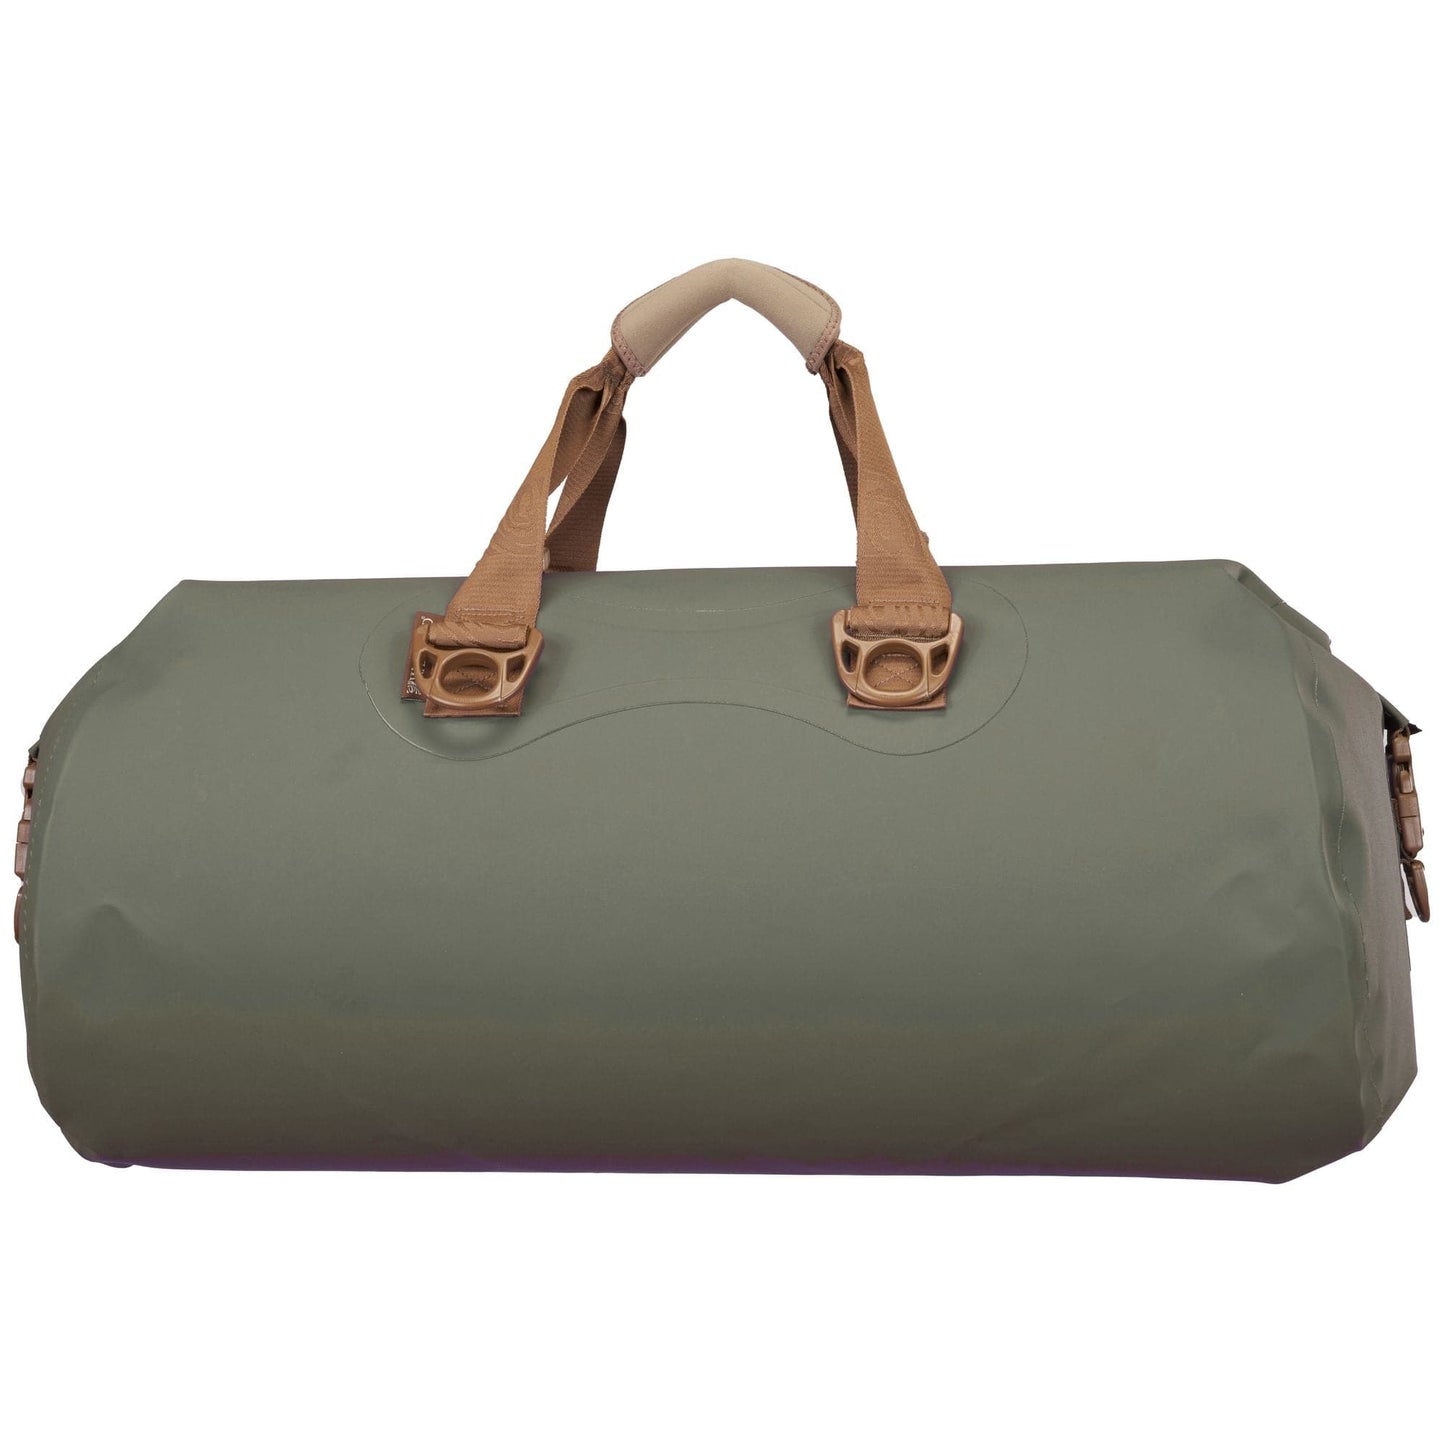 Featuring the Yukon Duffel dry bag manufactured by Watershed shown here from a fourth angle.